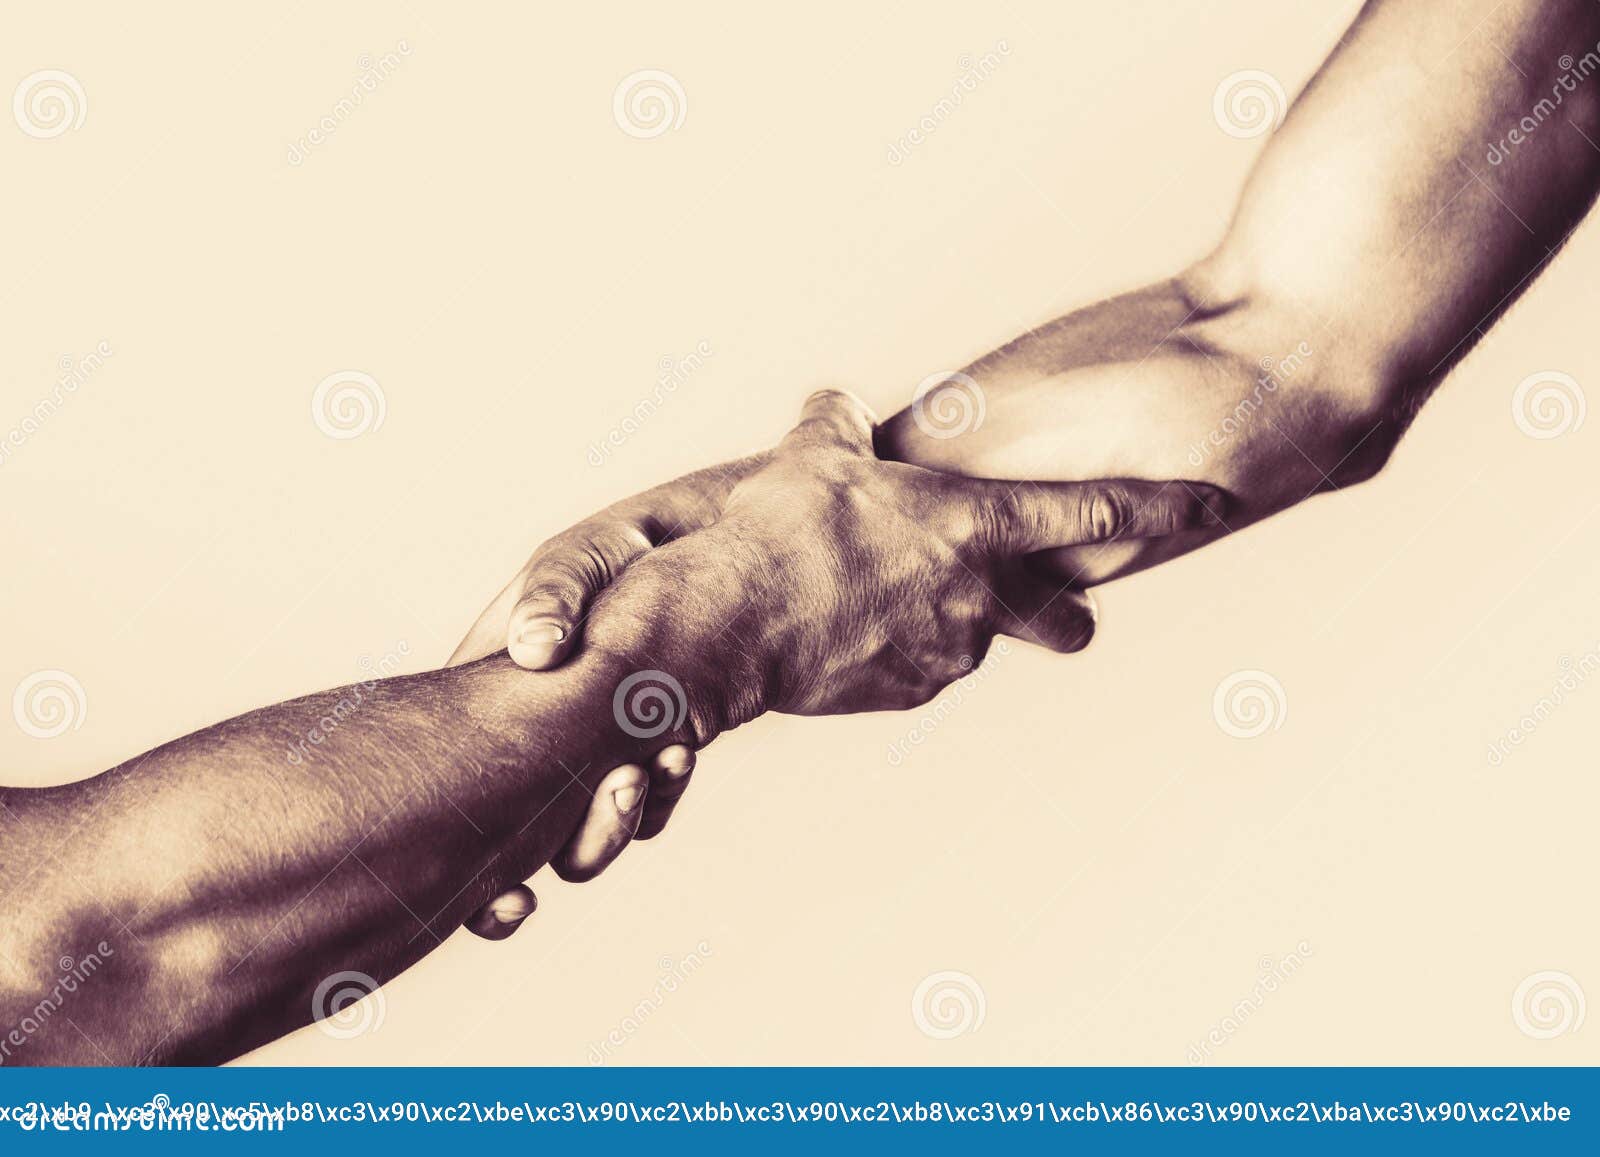 rescue, helping gesture or hands. helping hand concept, support. helping hand outstretched,  arm, salvation